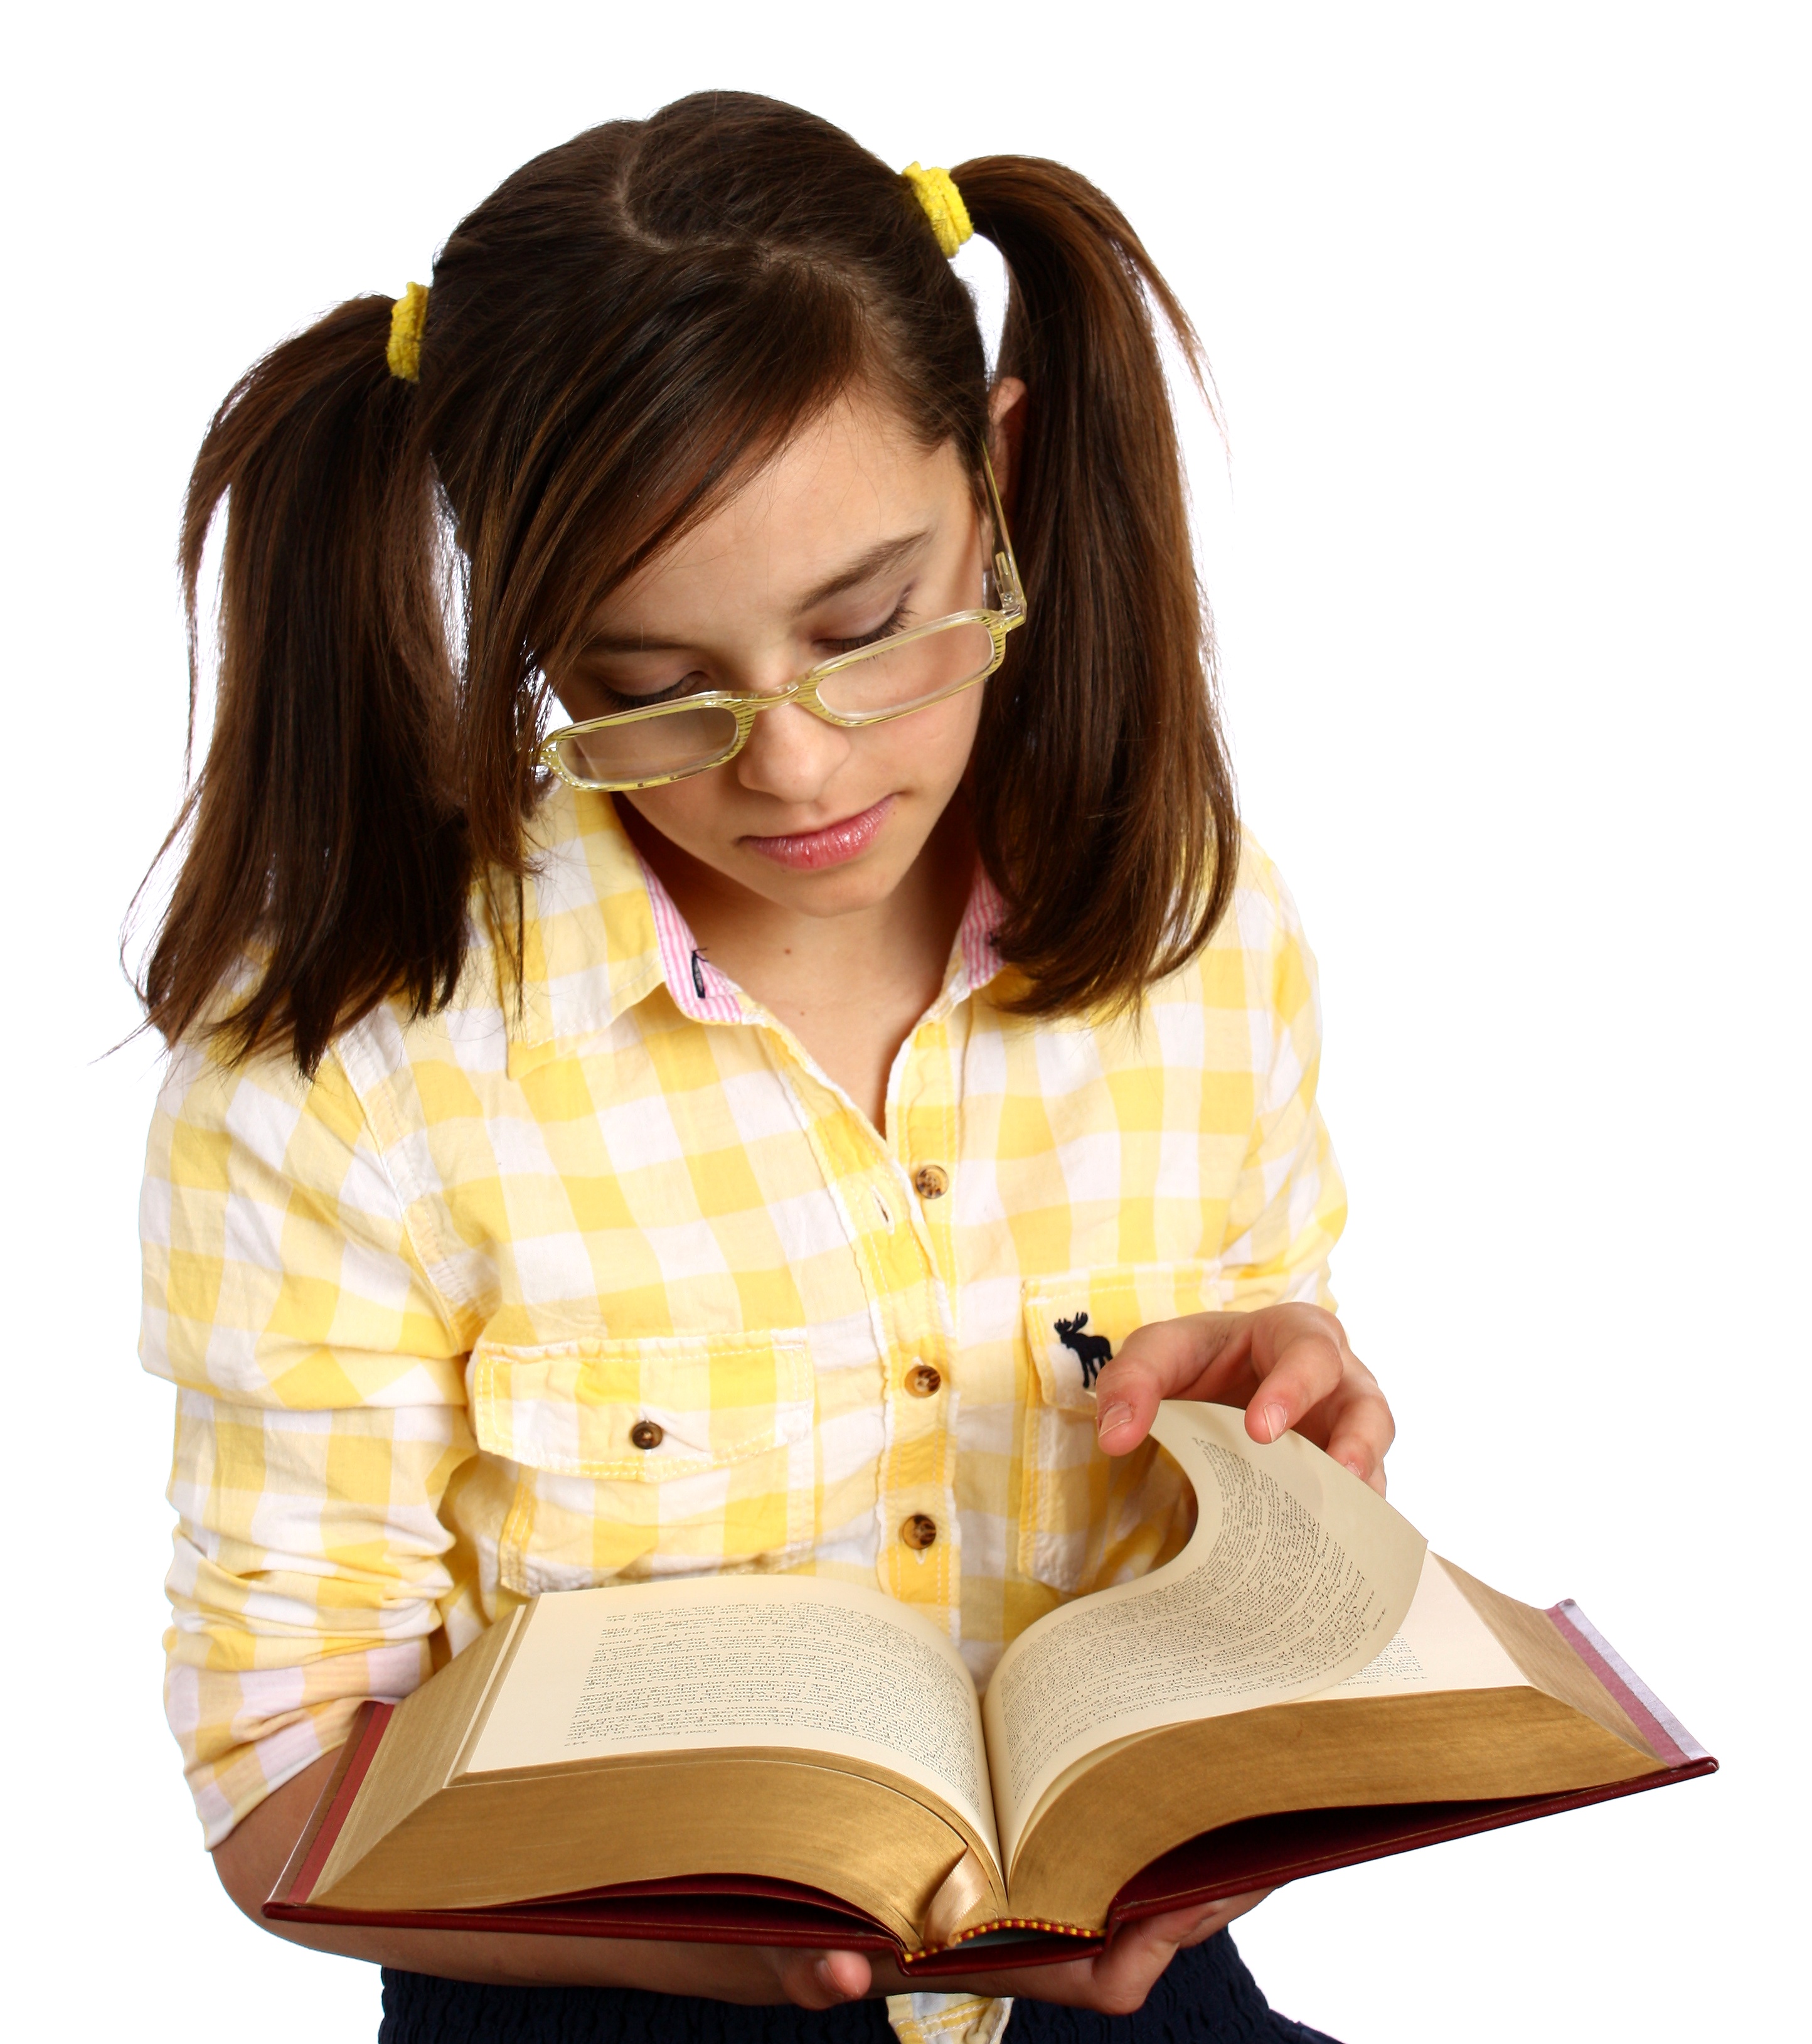 A smart girl with glasses reading a book, People, Uniform, Tweens, Teens, HQ Photo